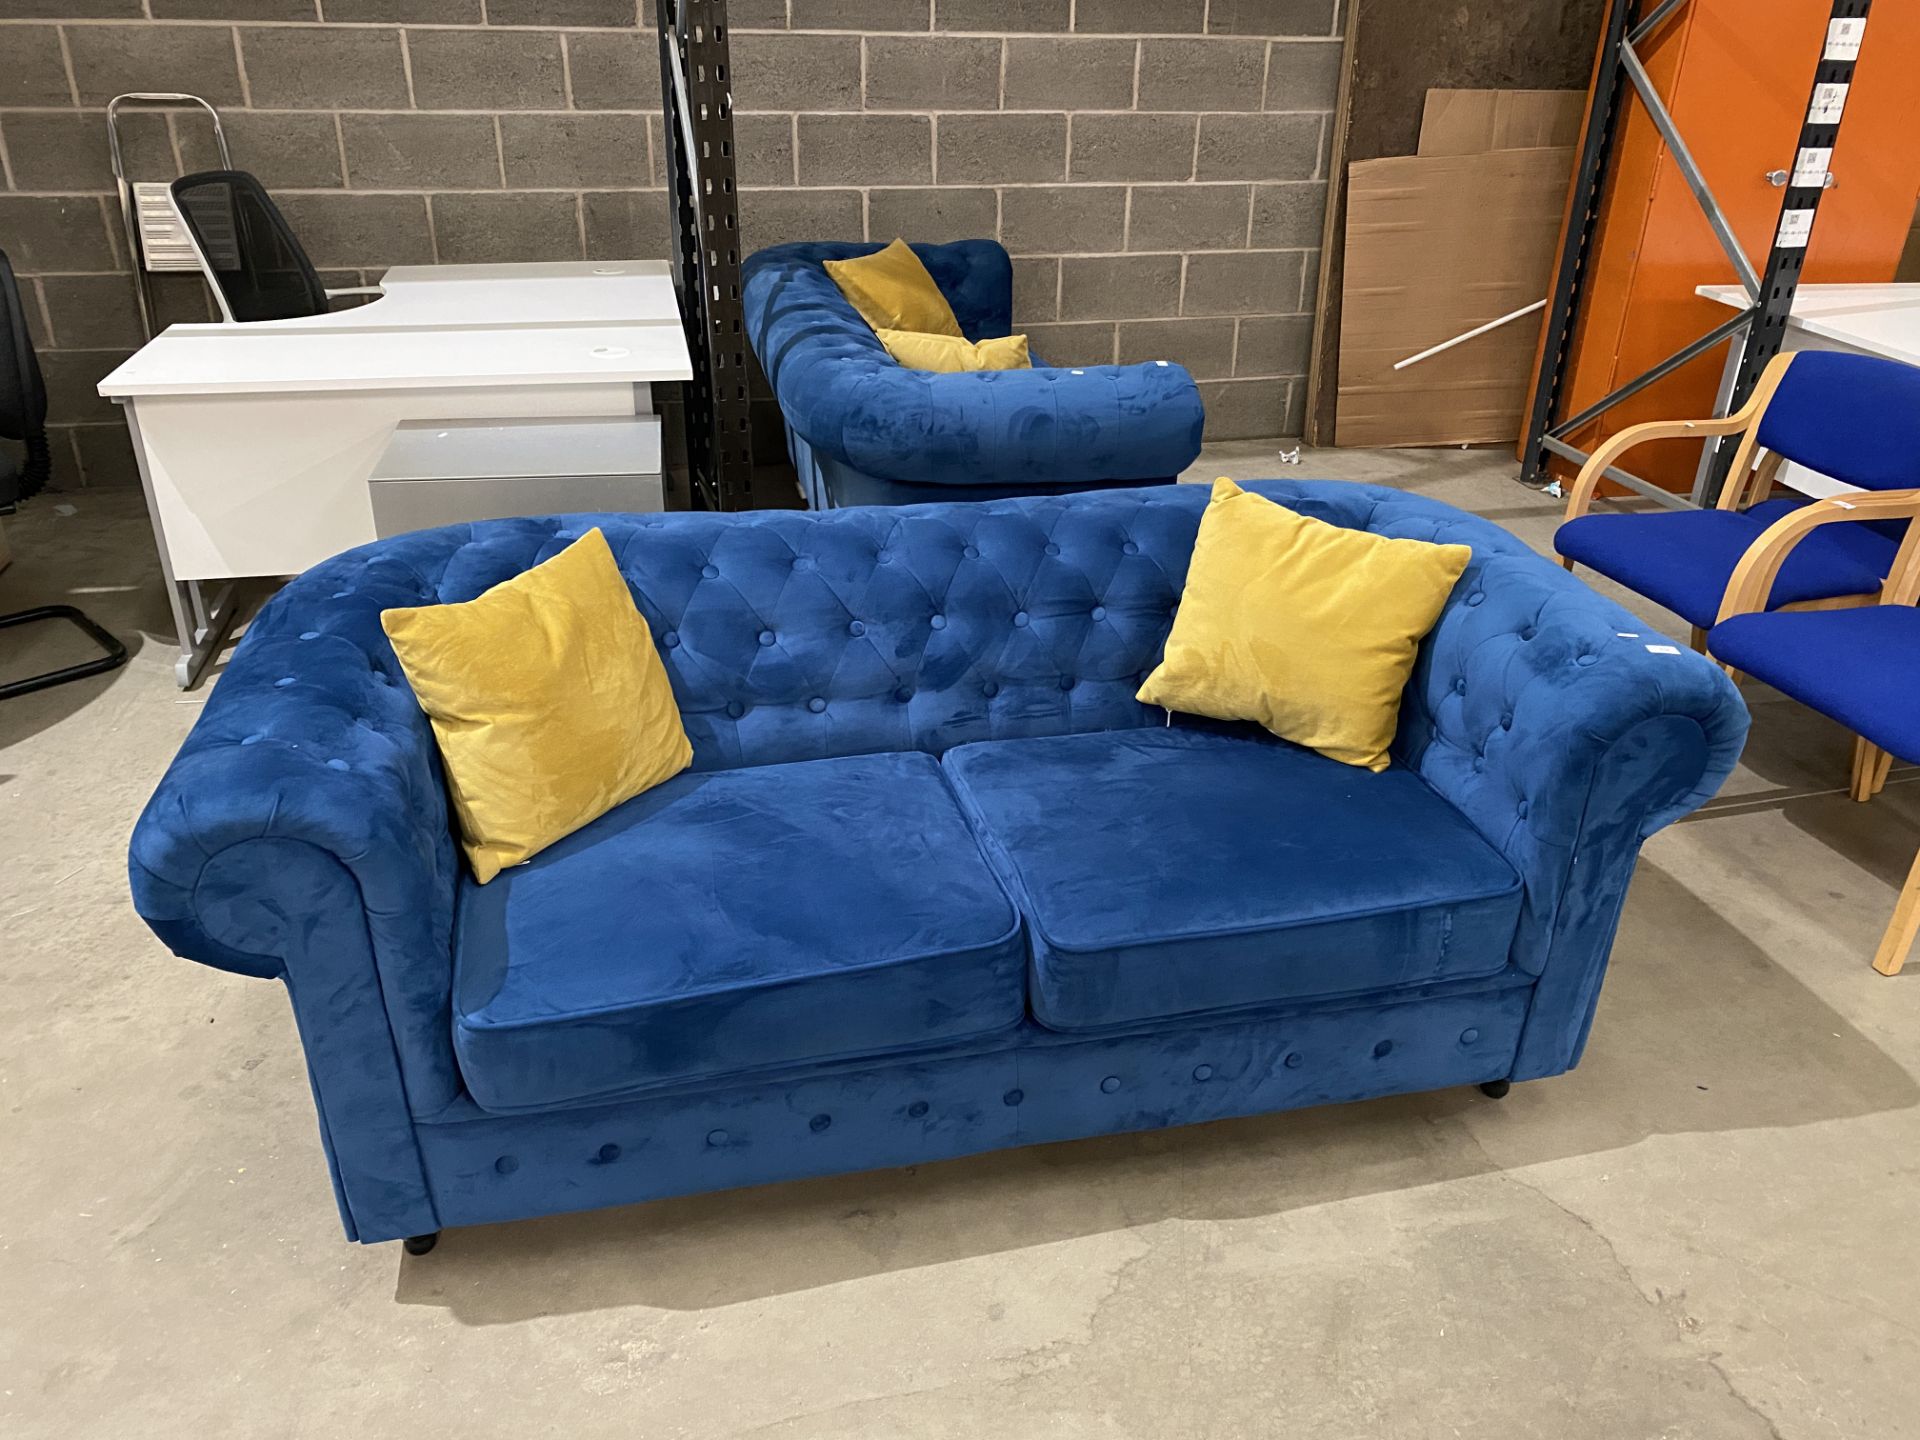 Blue upholstered button-backed Chesterfield style 2-seater sofa complete with cushions (saleroom - Image 3 of 11